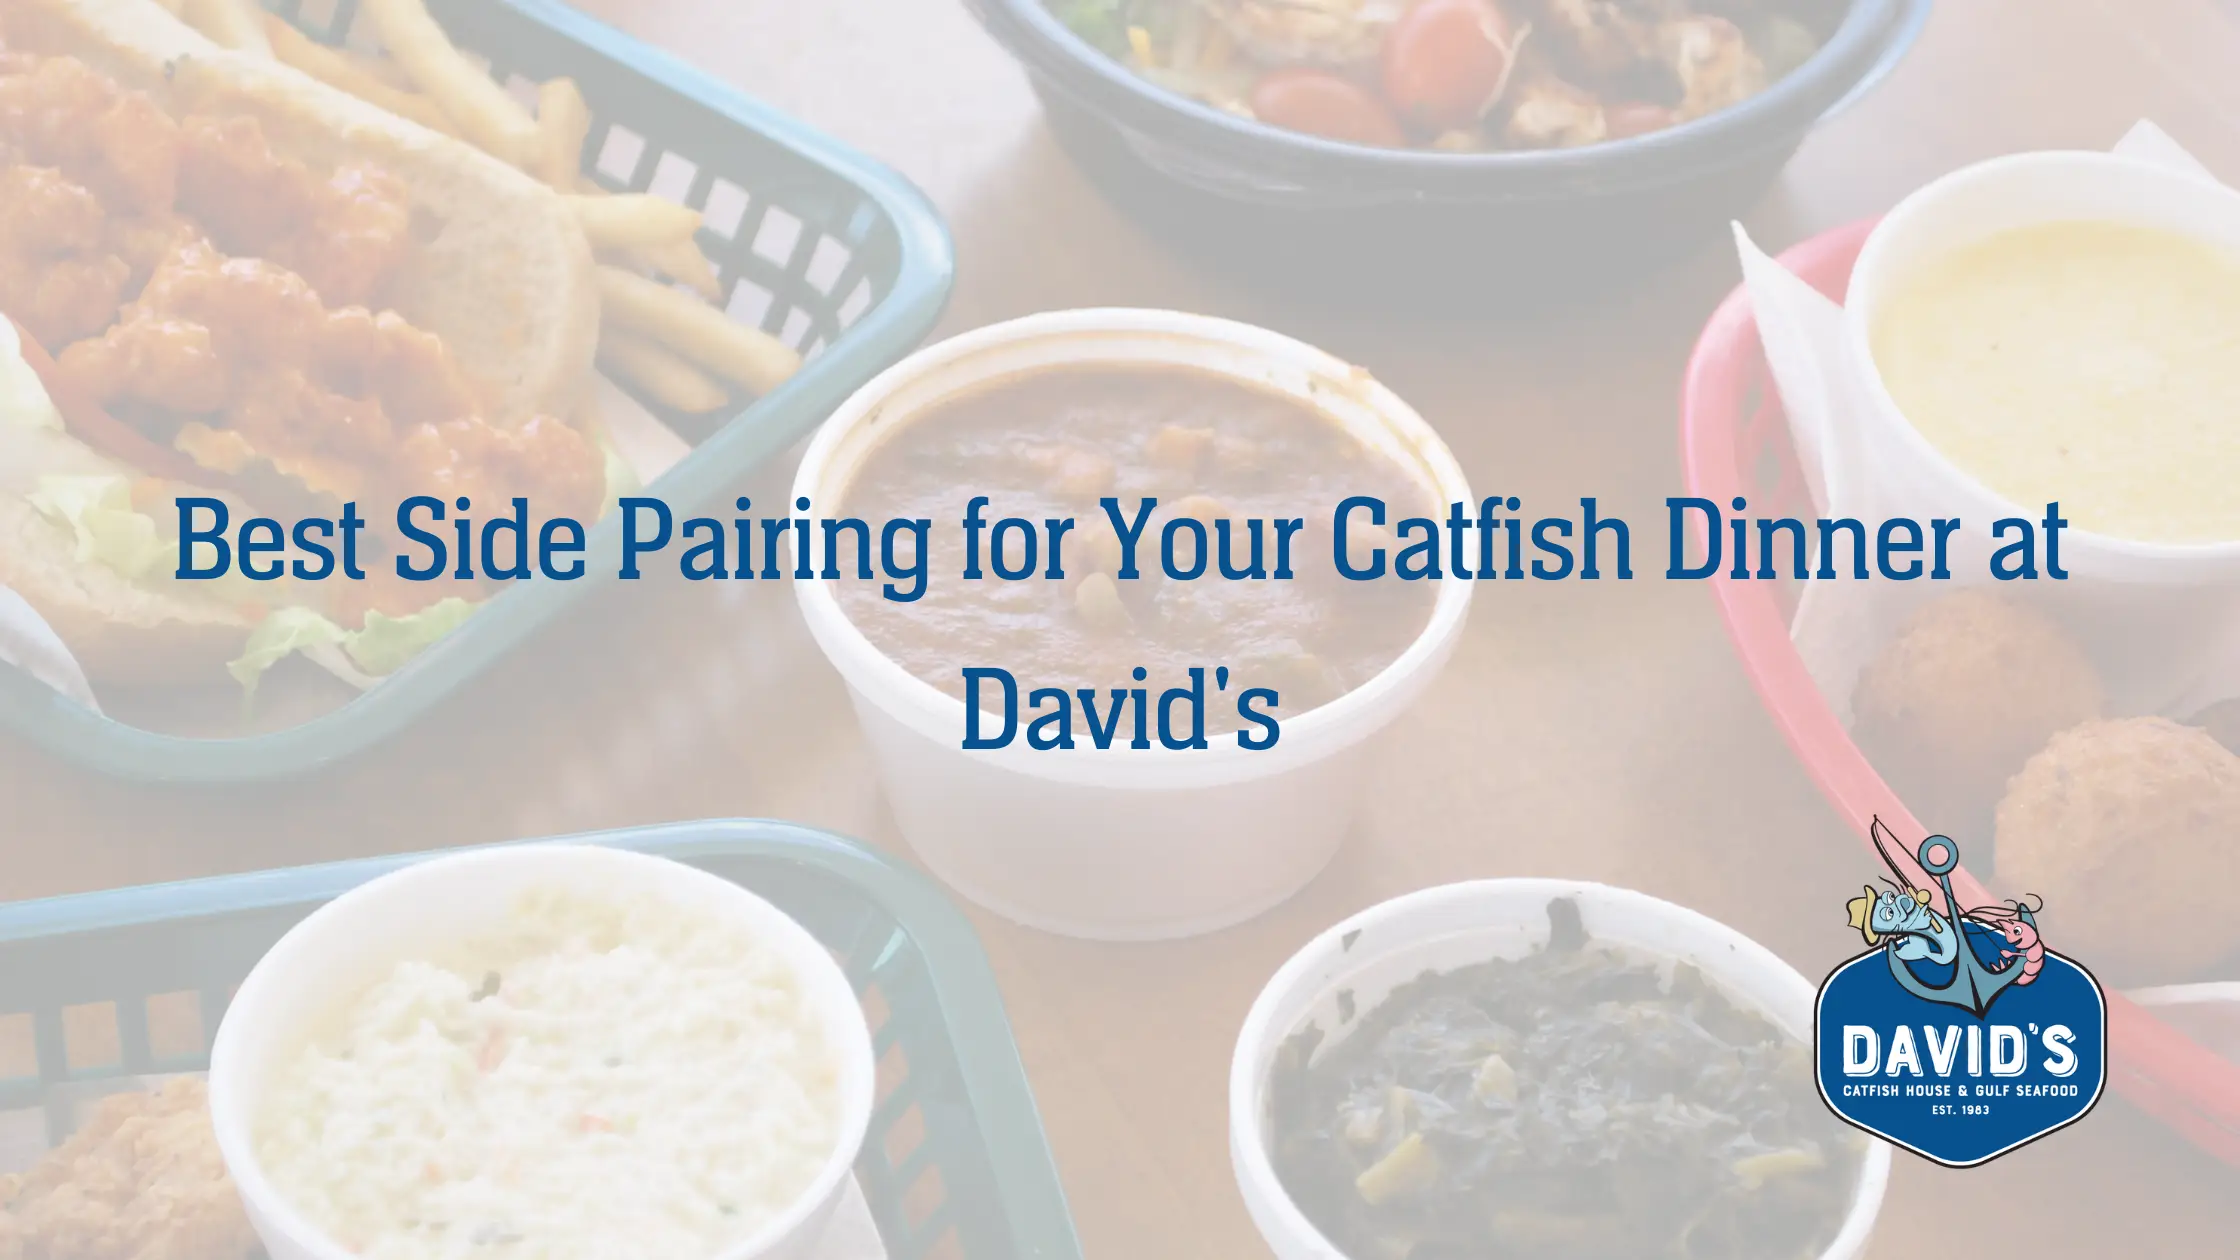 Best Side Pairing for Your Catfish Dinner at David's